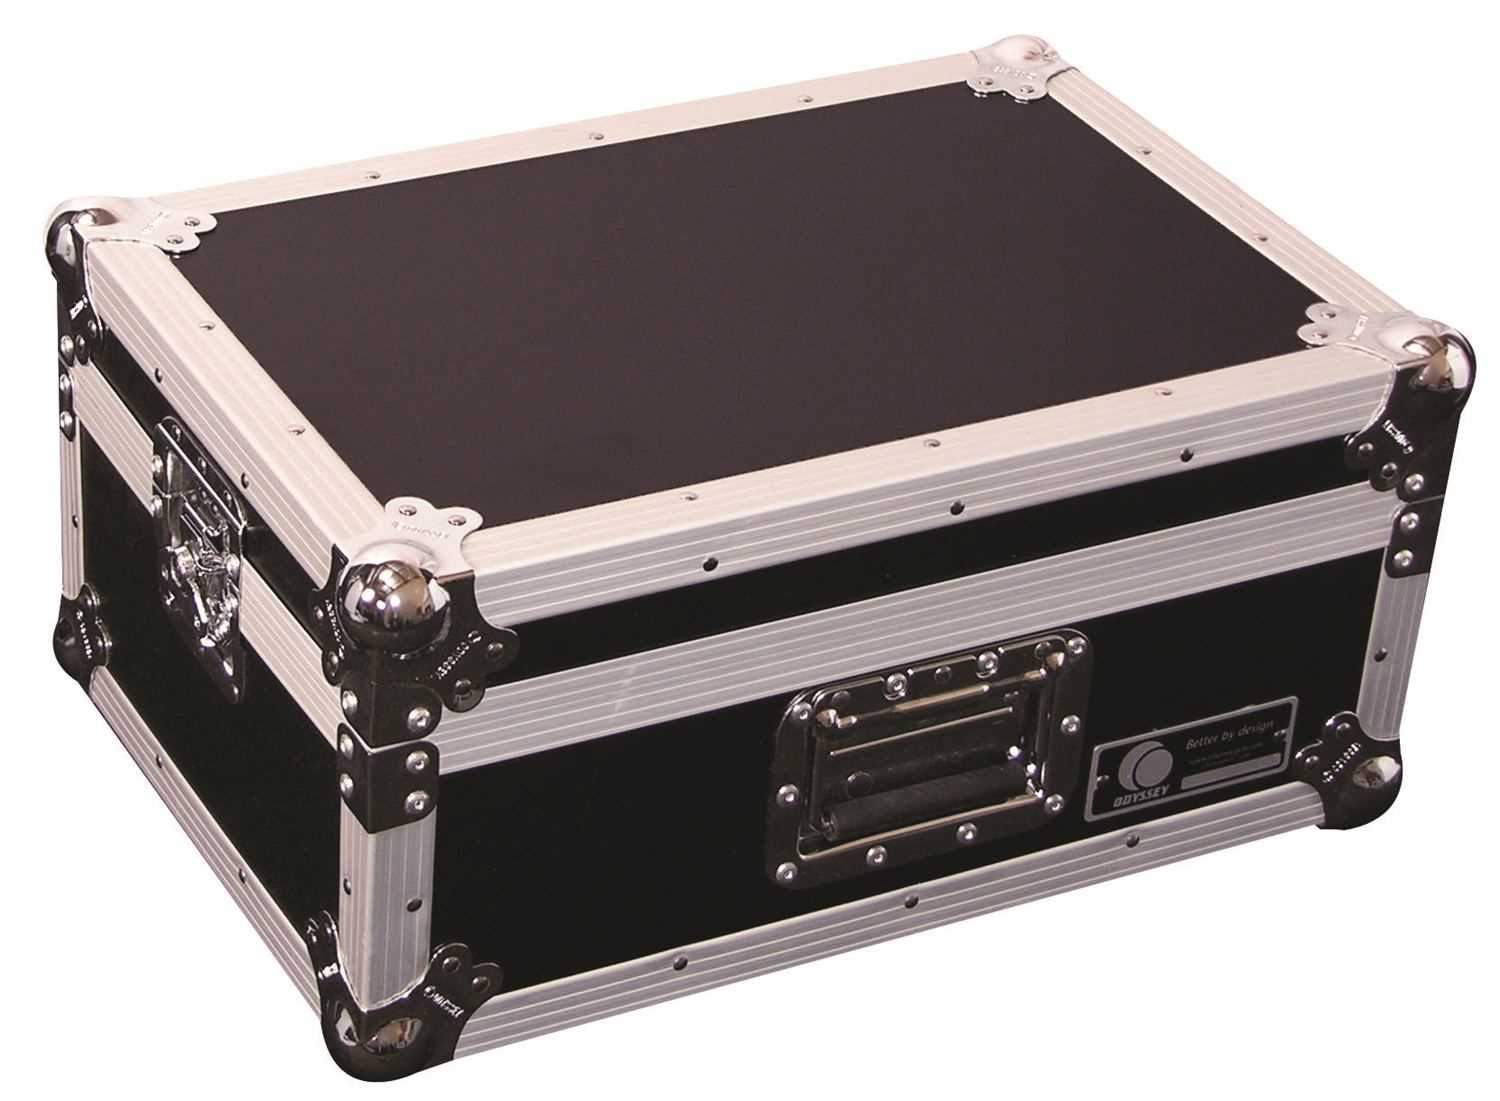 Odyssey FRCDM Cd Mixer Case For Numark Cd Mix Un - ProSound and Stage Lighting